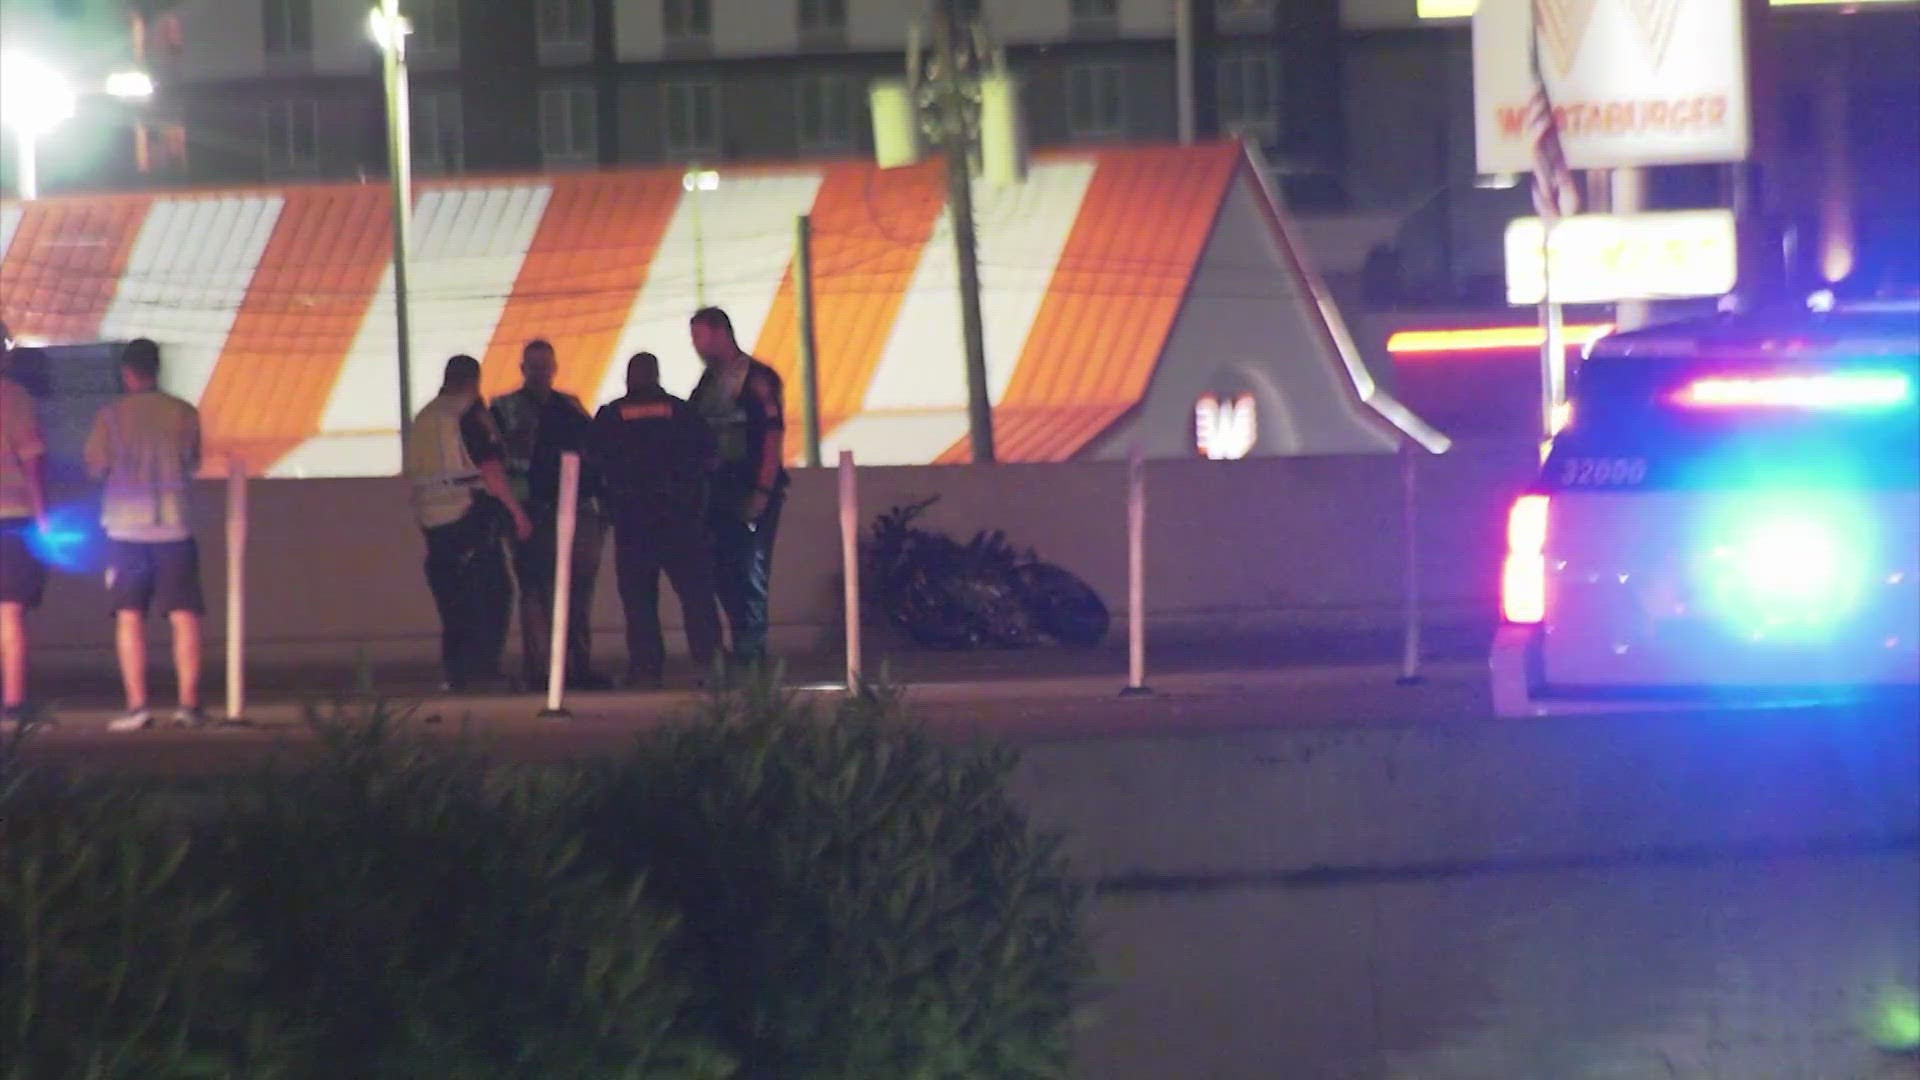 One rider was killed, and three others were hospitalized after a crash involving motorcycles turned deadly on the Katy Freeway.